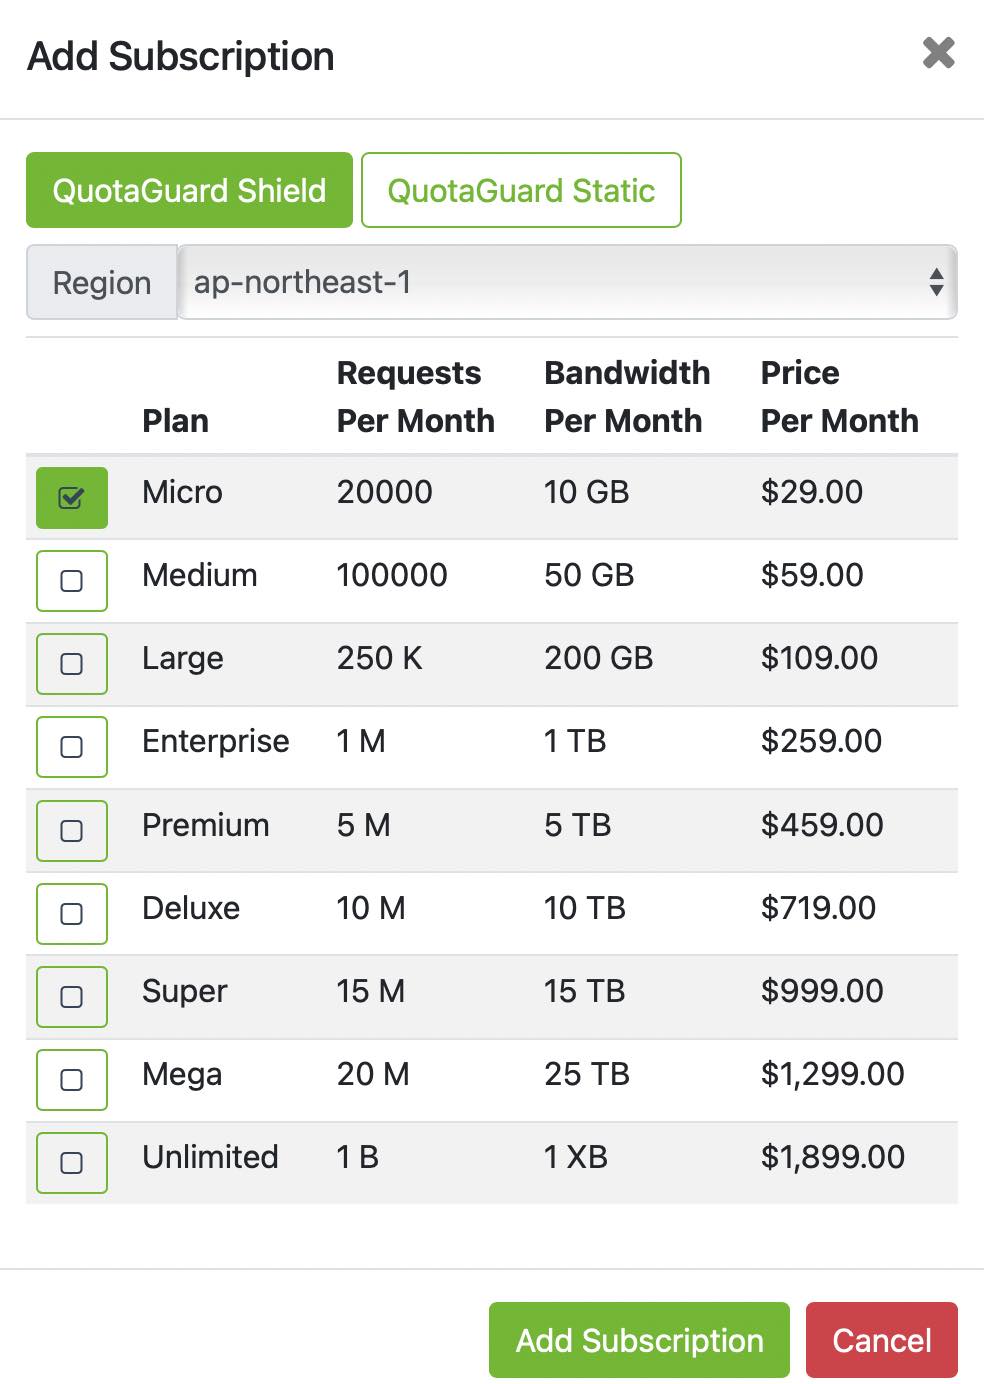 Add Subscription options for region and plan